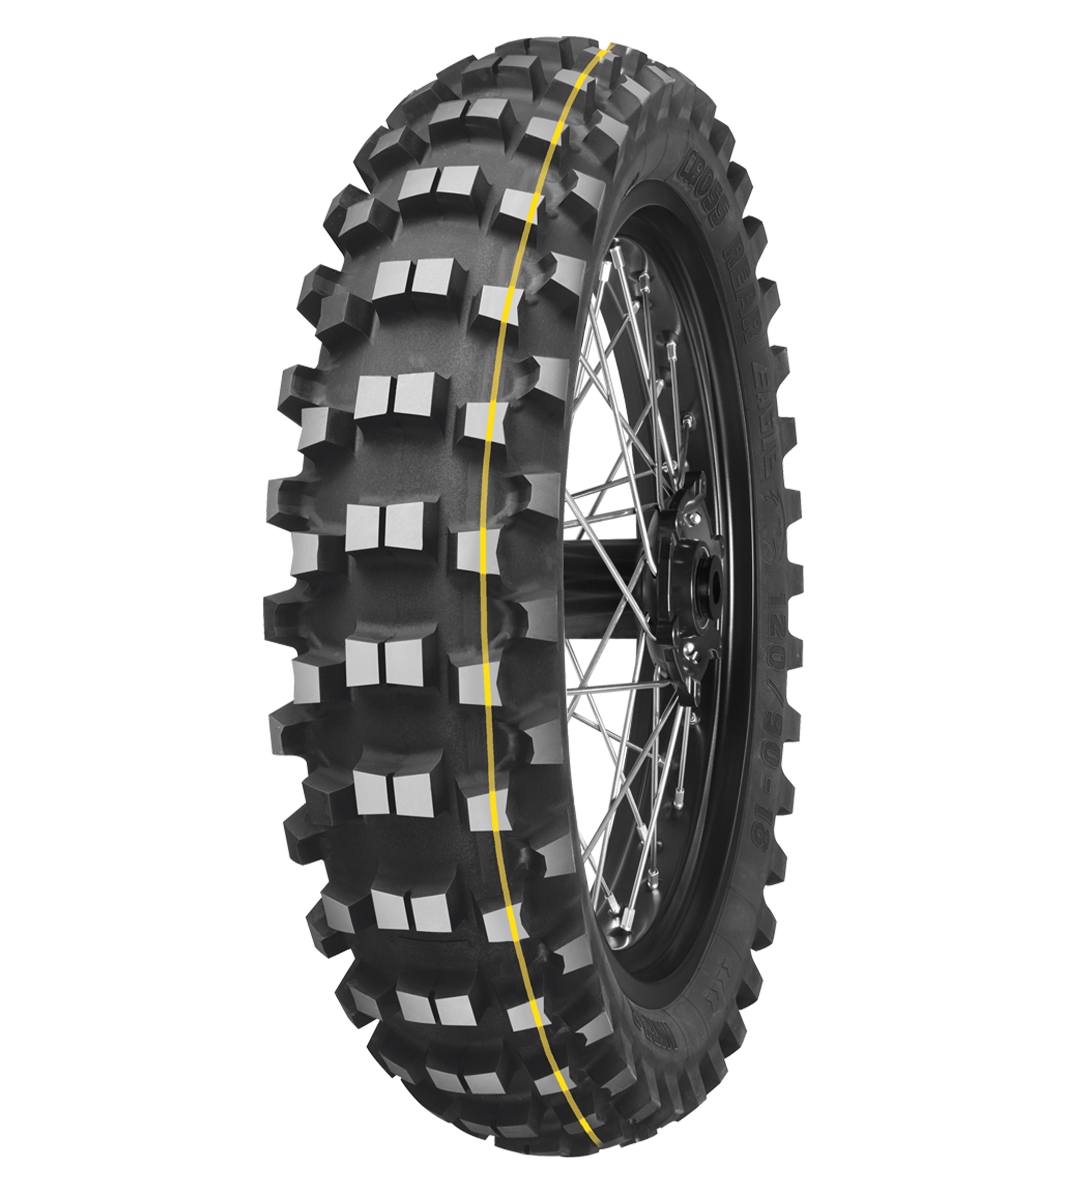 Mitas C-18 EAGLE 120/90-18 Enduro Competition Off-Road COUNTRY CROSS 65R Yellow Tube Rear Tire, 226555, 120/90-18, C-18 Eagle, Enduro, Enduro Competition, Off-Road, Rear, Tires - Imported and distributed in North &amp; South America by Lindeco Genuine Powersports - Premier Powersports Equipment and Accessories for Motorcycle Enthusiasts, Professional Riders and Dealers.